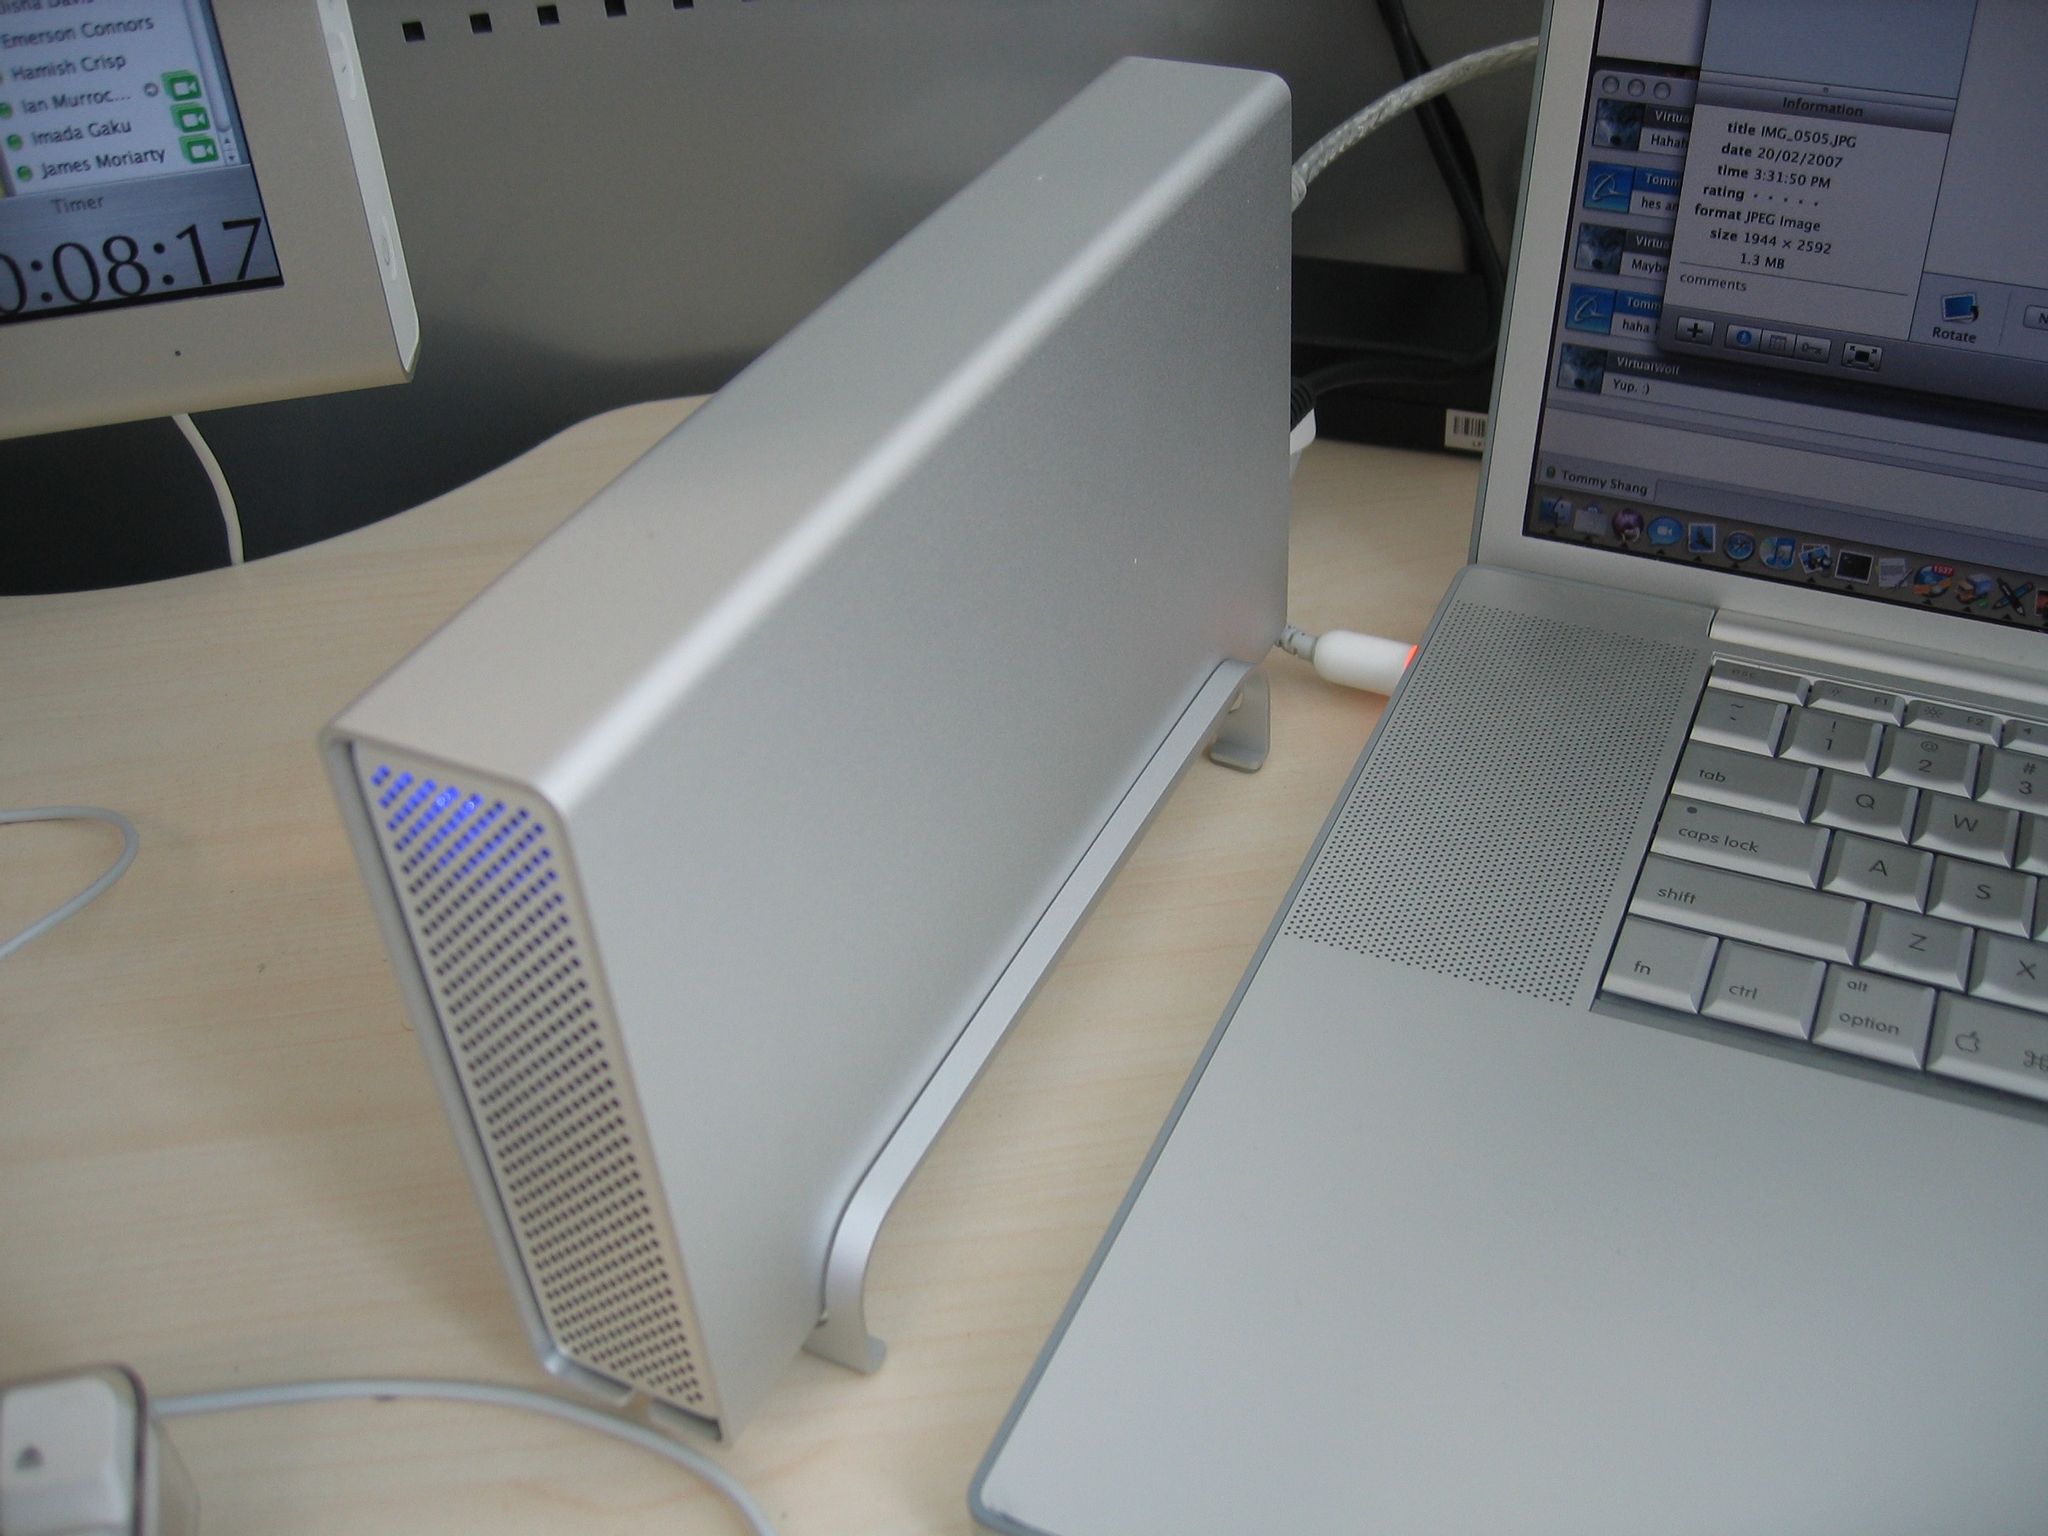 A photo of an external hard disk case that has the exact same style as a Mac Pro or Power Mac G5.